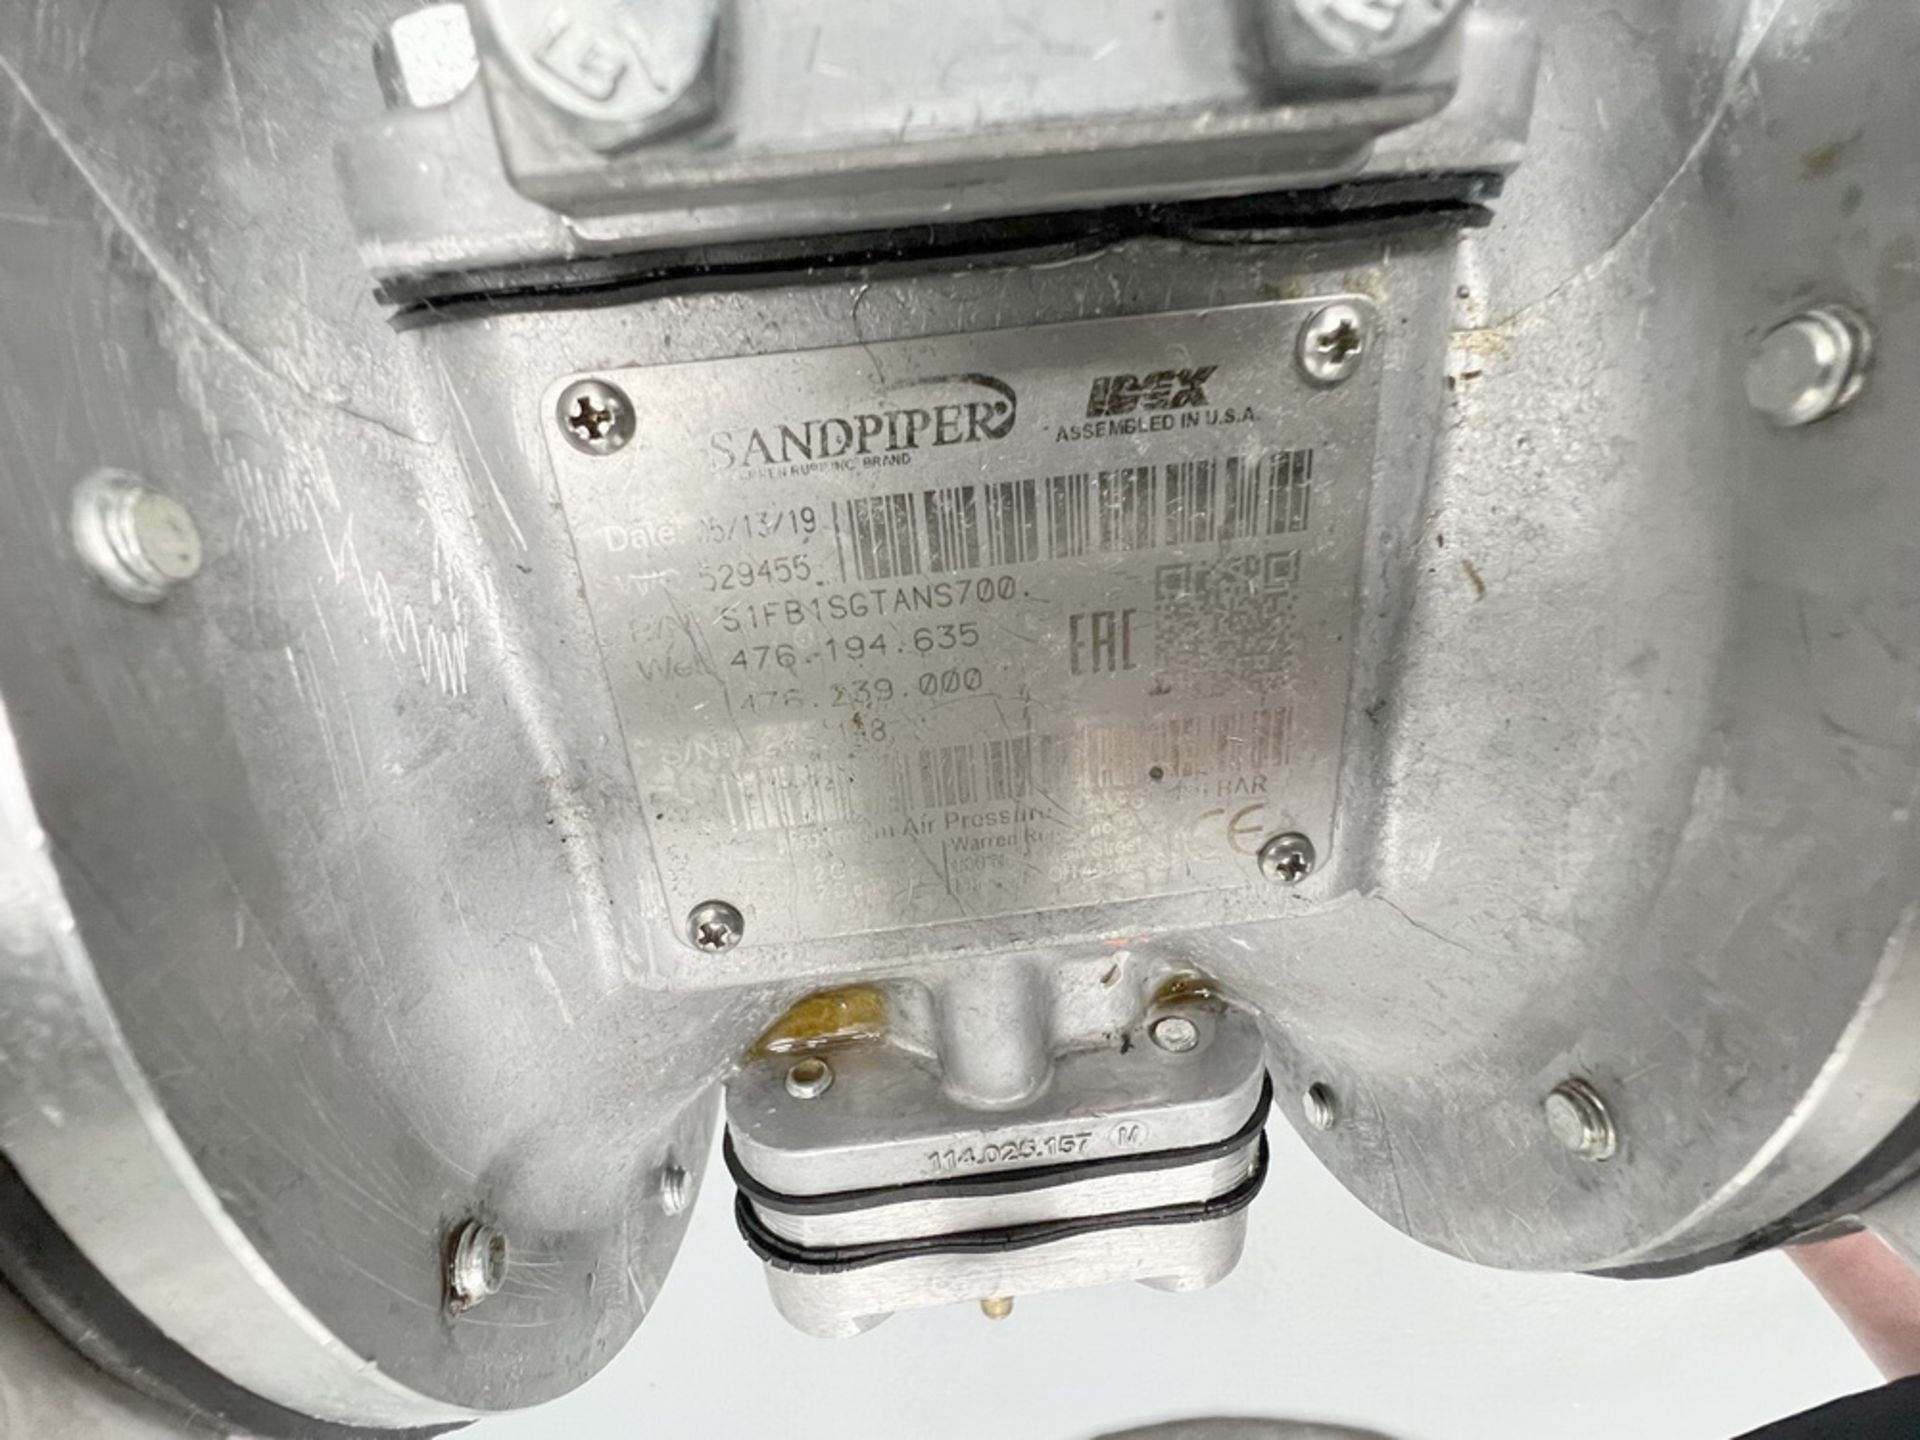 Sandpiper Stainless Steel Diaphragm Pump - Image 3 of 3